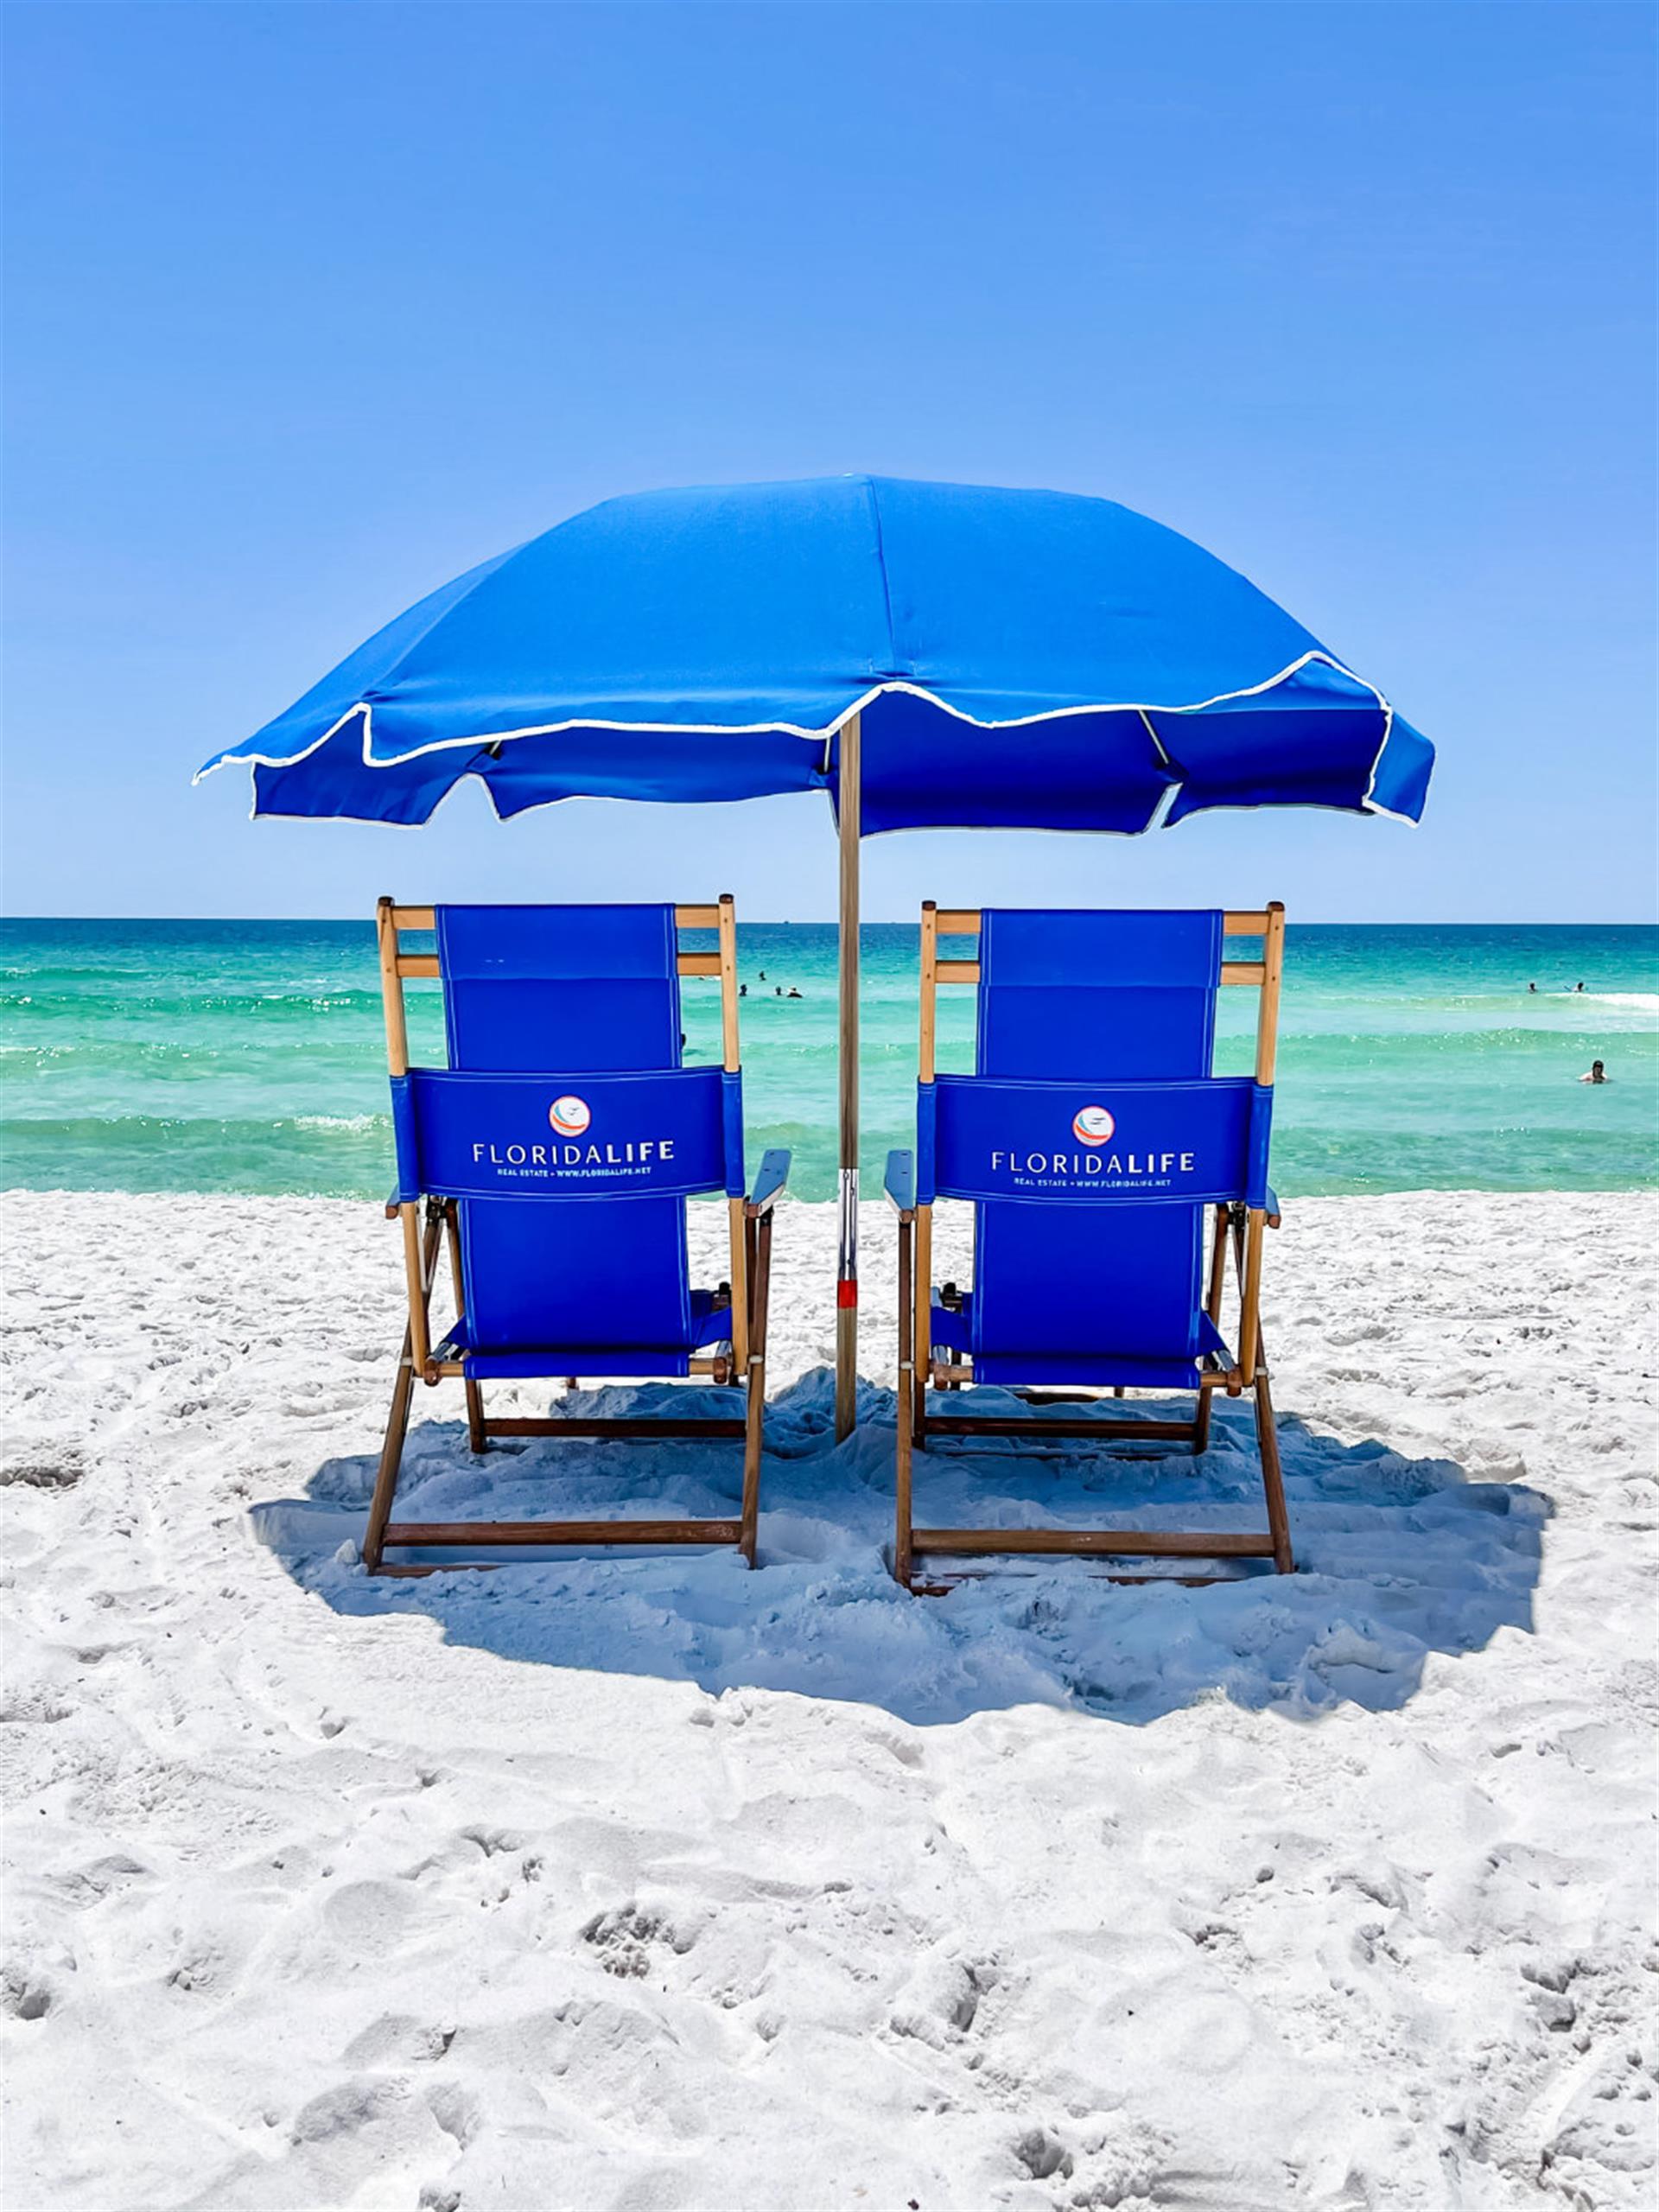 Two blue beach chairs in the sand facing the ocean with a blue umbrella shading them